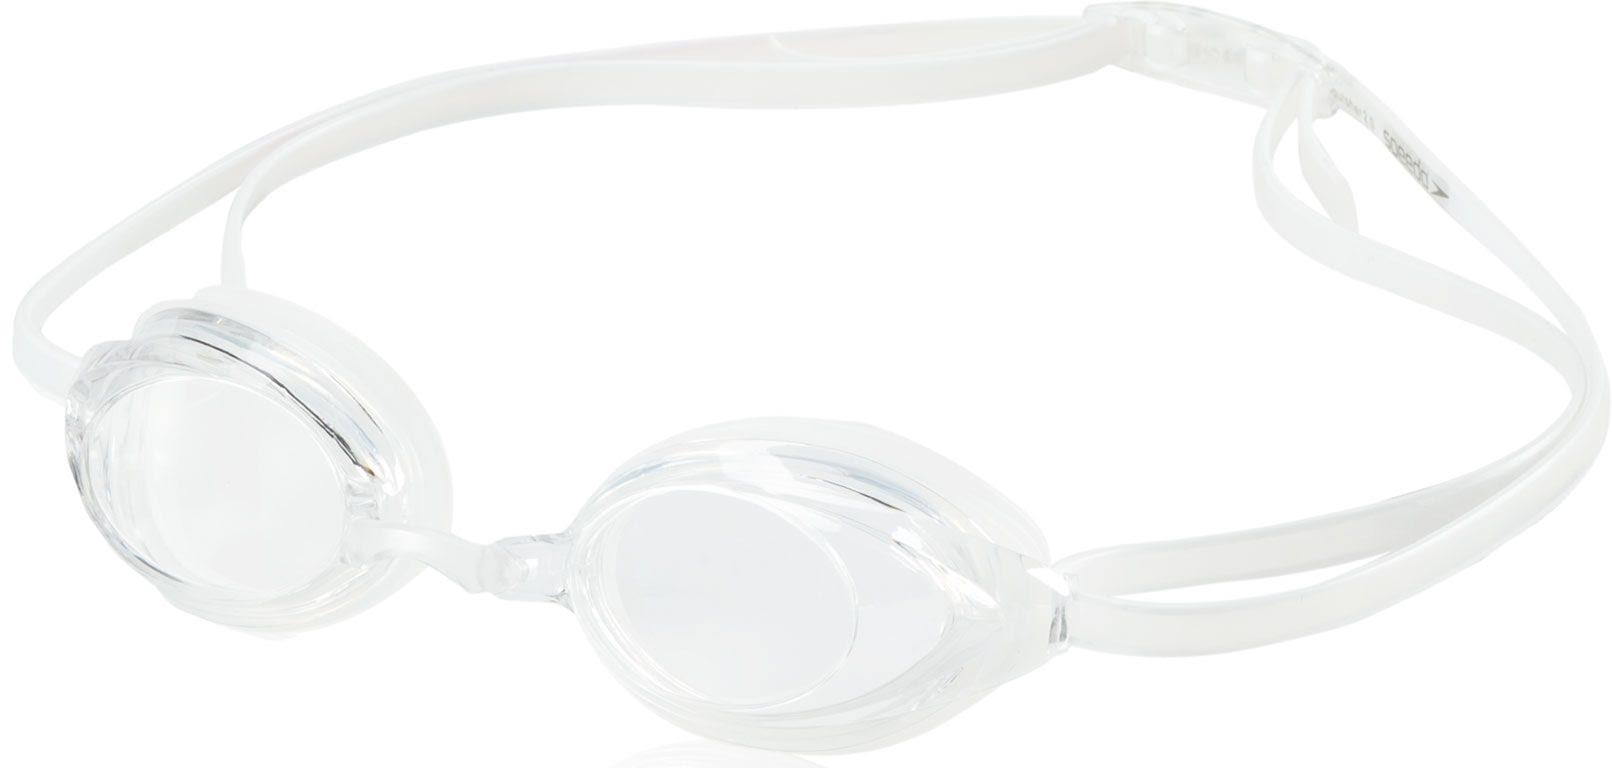 Speedo Jr. Vanquisher 2.0 Goggle - Clear | Silicone - Swimoutlet.com